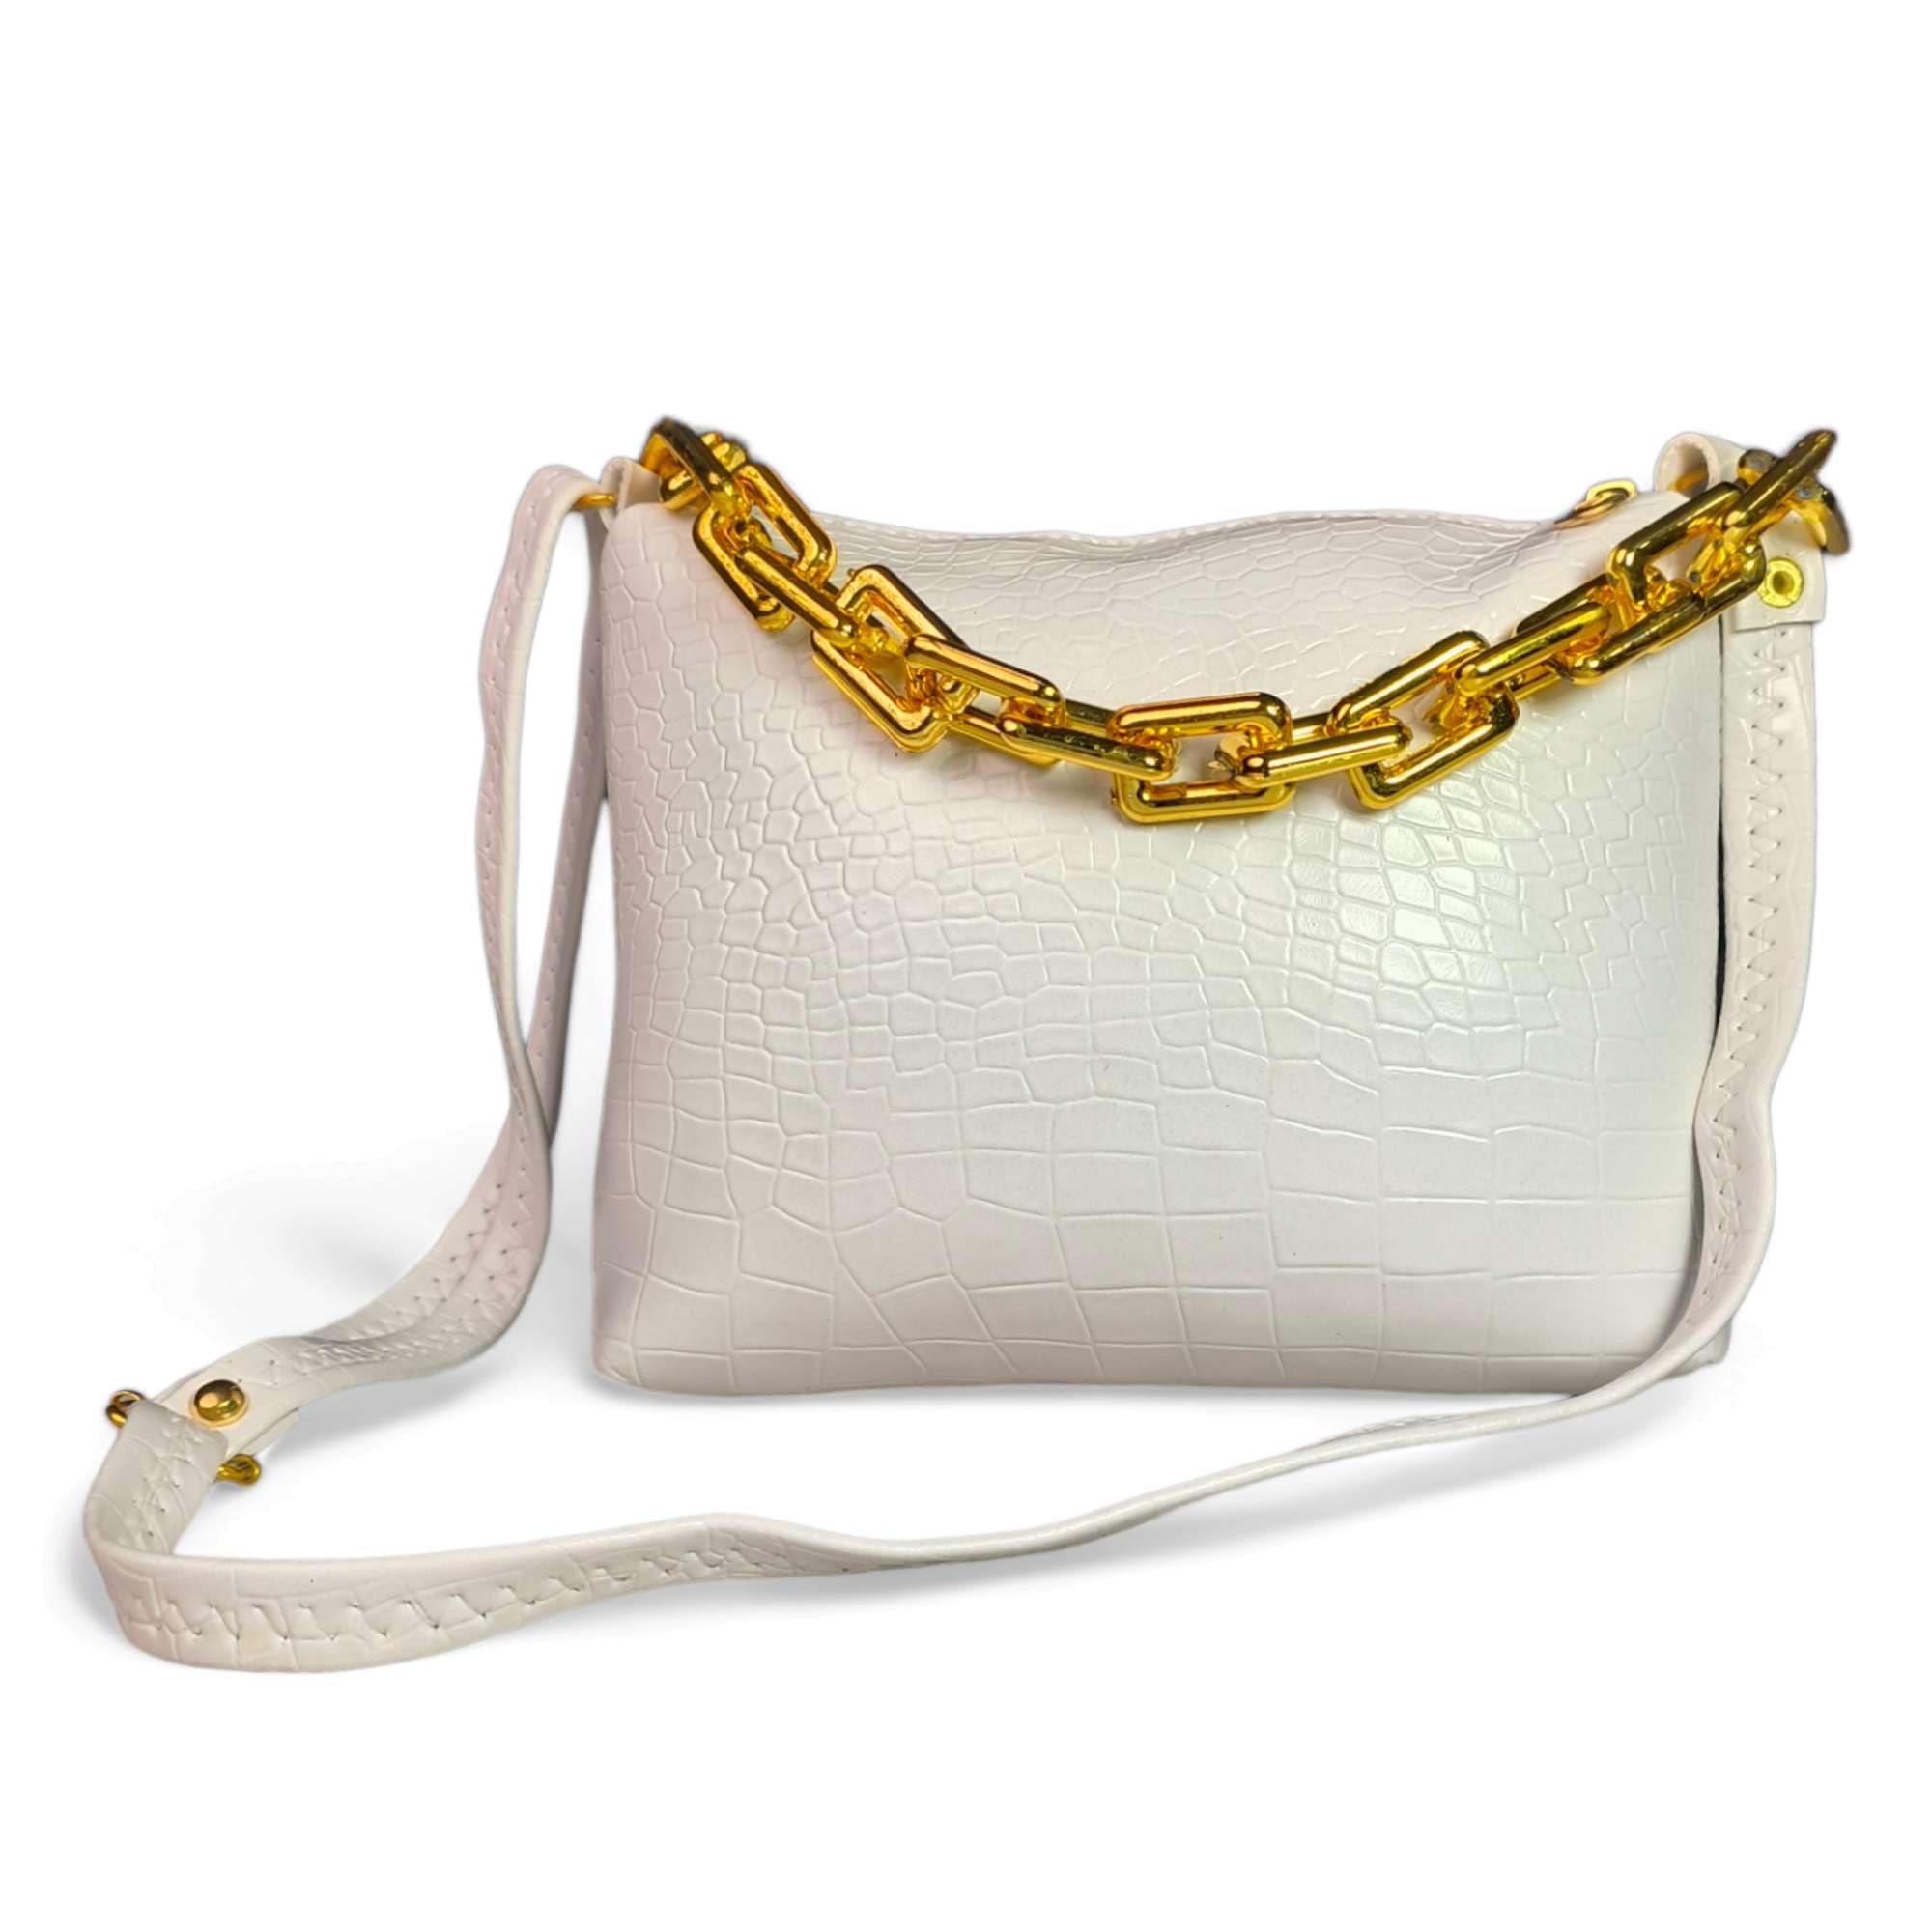 Amazon.com: Crossbody Shoulder Bag for Women Luxurious Snake Print Leather Chain  Tote Evening Square Handbag Satchel Purse White : Clothing, Shoes & Jewelry